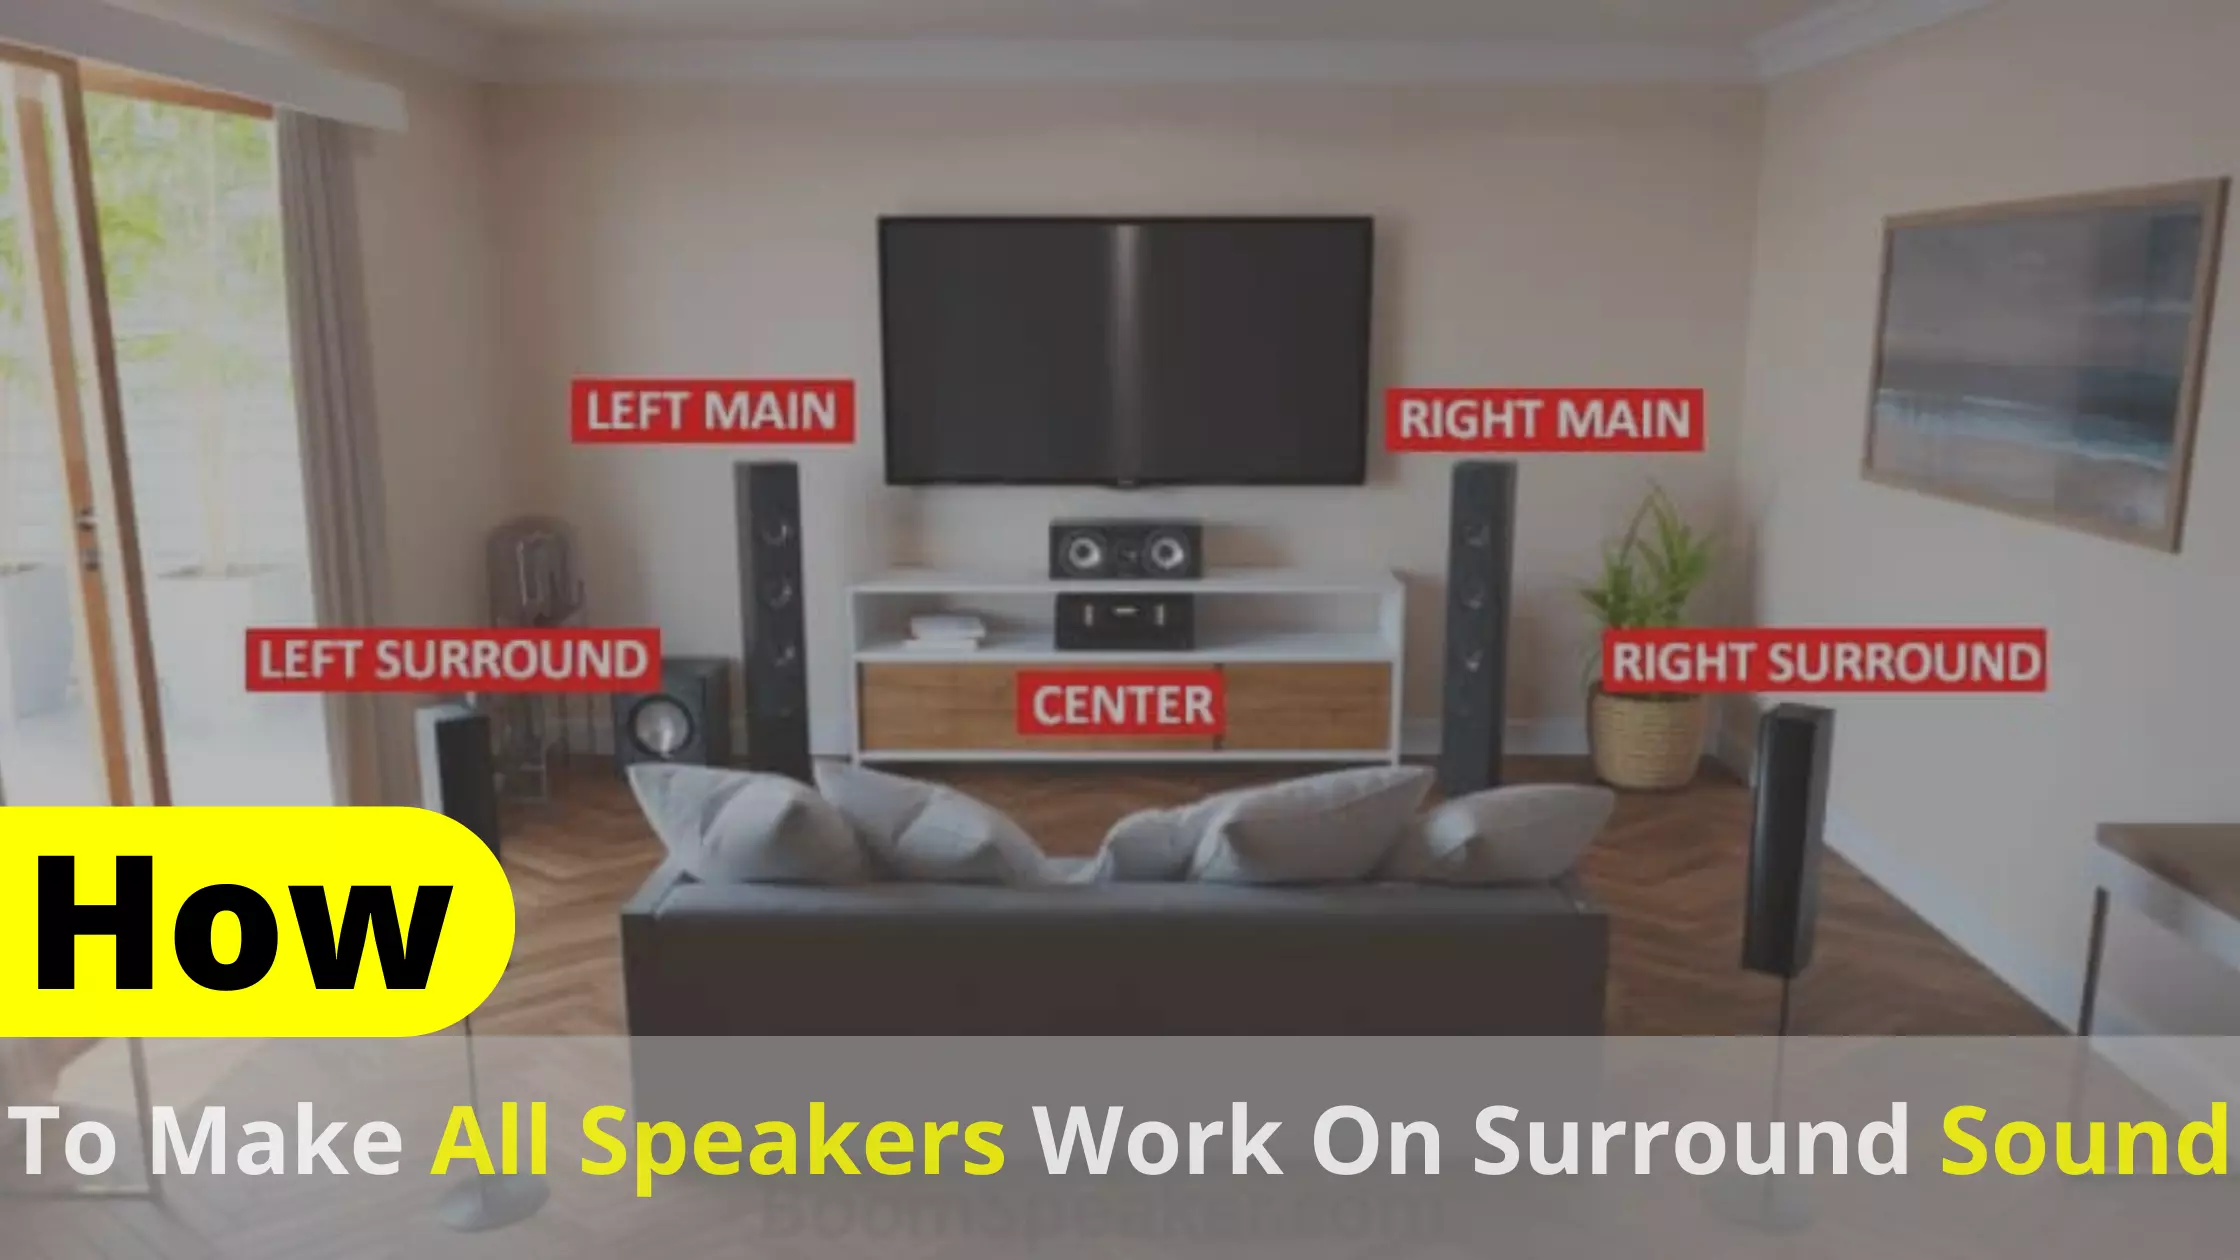 How To Make All Speakers Work On Surround Sound?